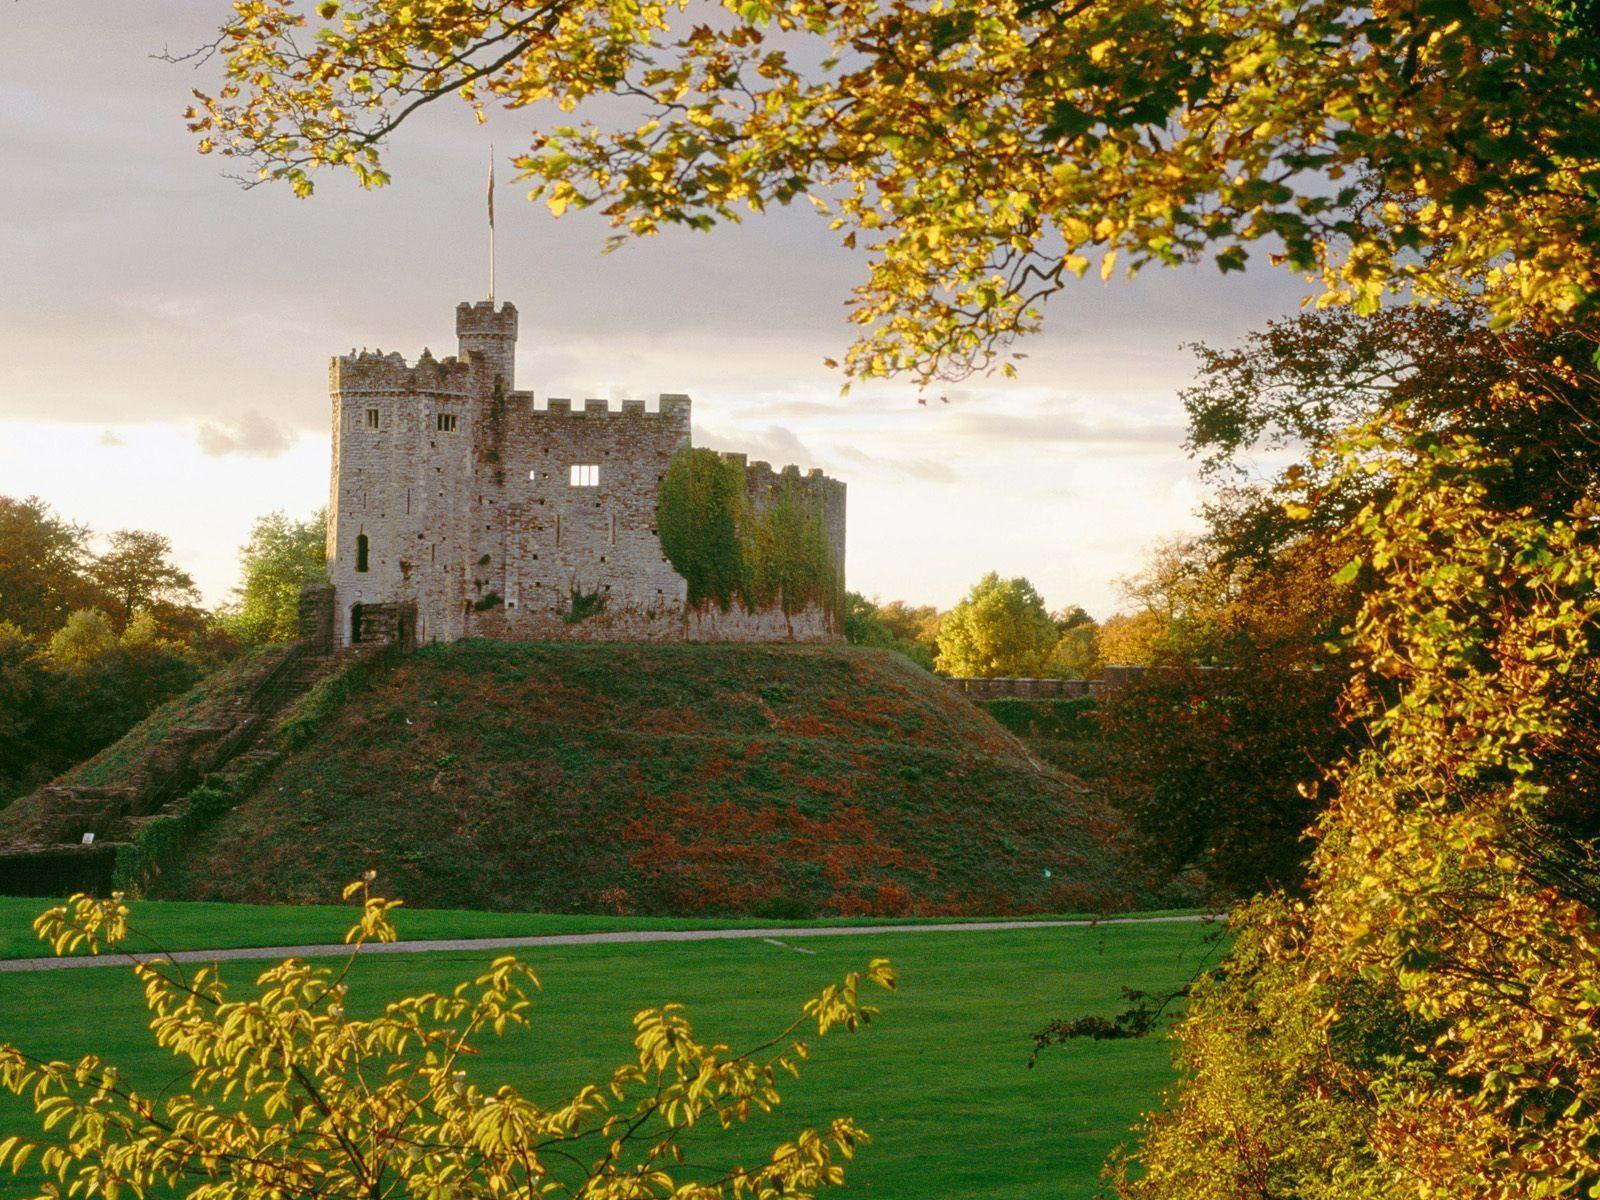 image about Castles Wales. Cardiff, Wales uk